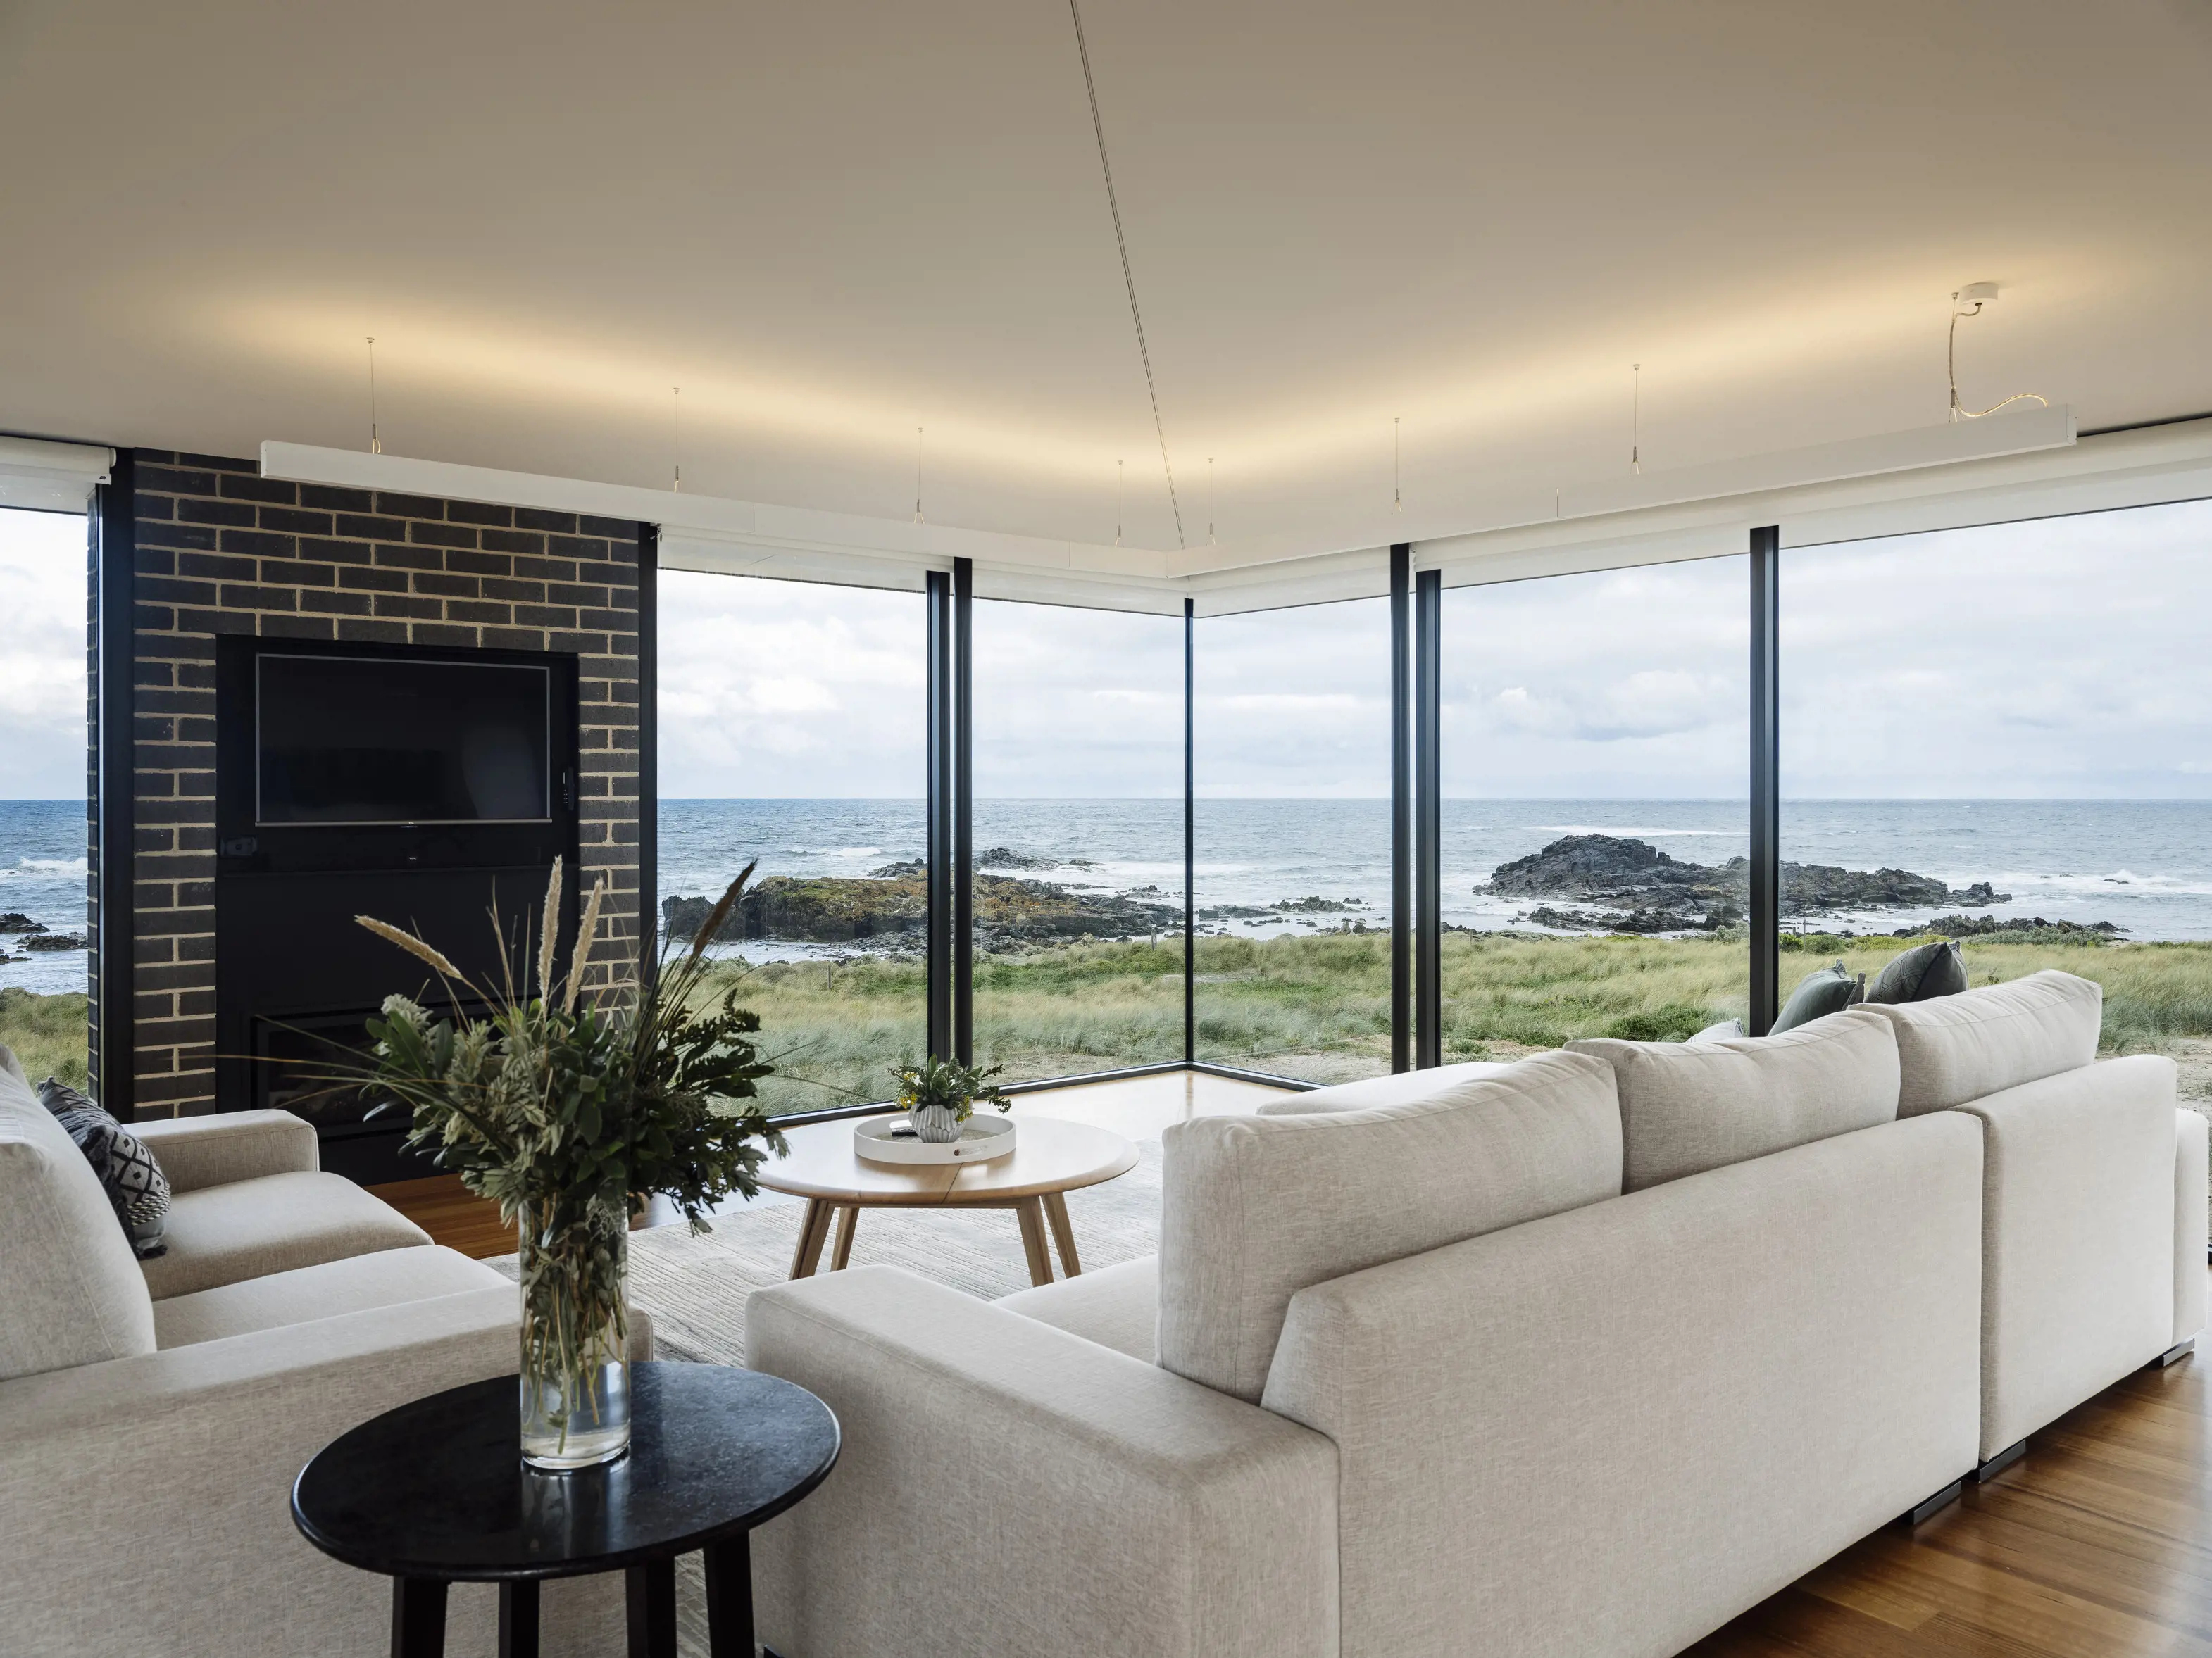 Image of incredible interior of one of three fully glazed luxury coastal retreats looks out to the amazing coastline, located in Ettrick Rocks.